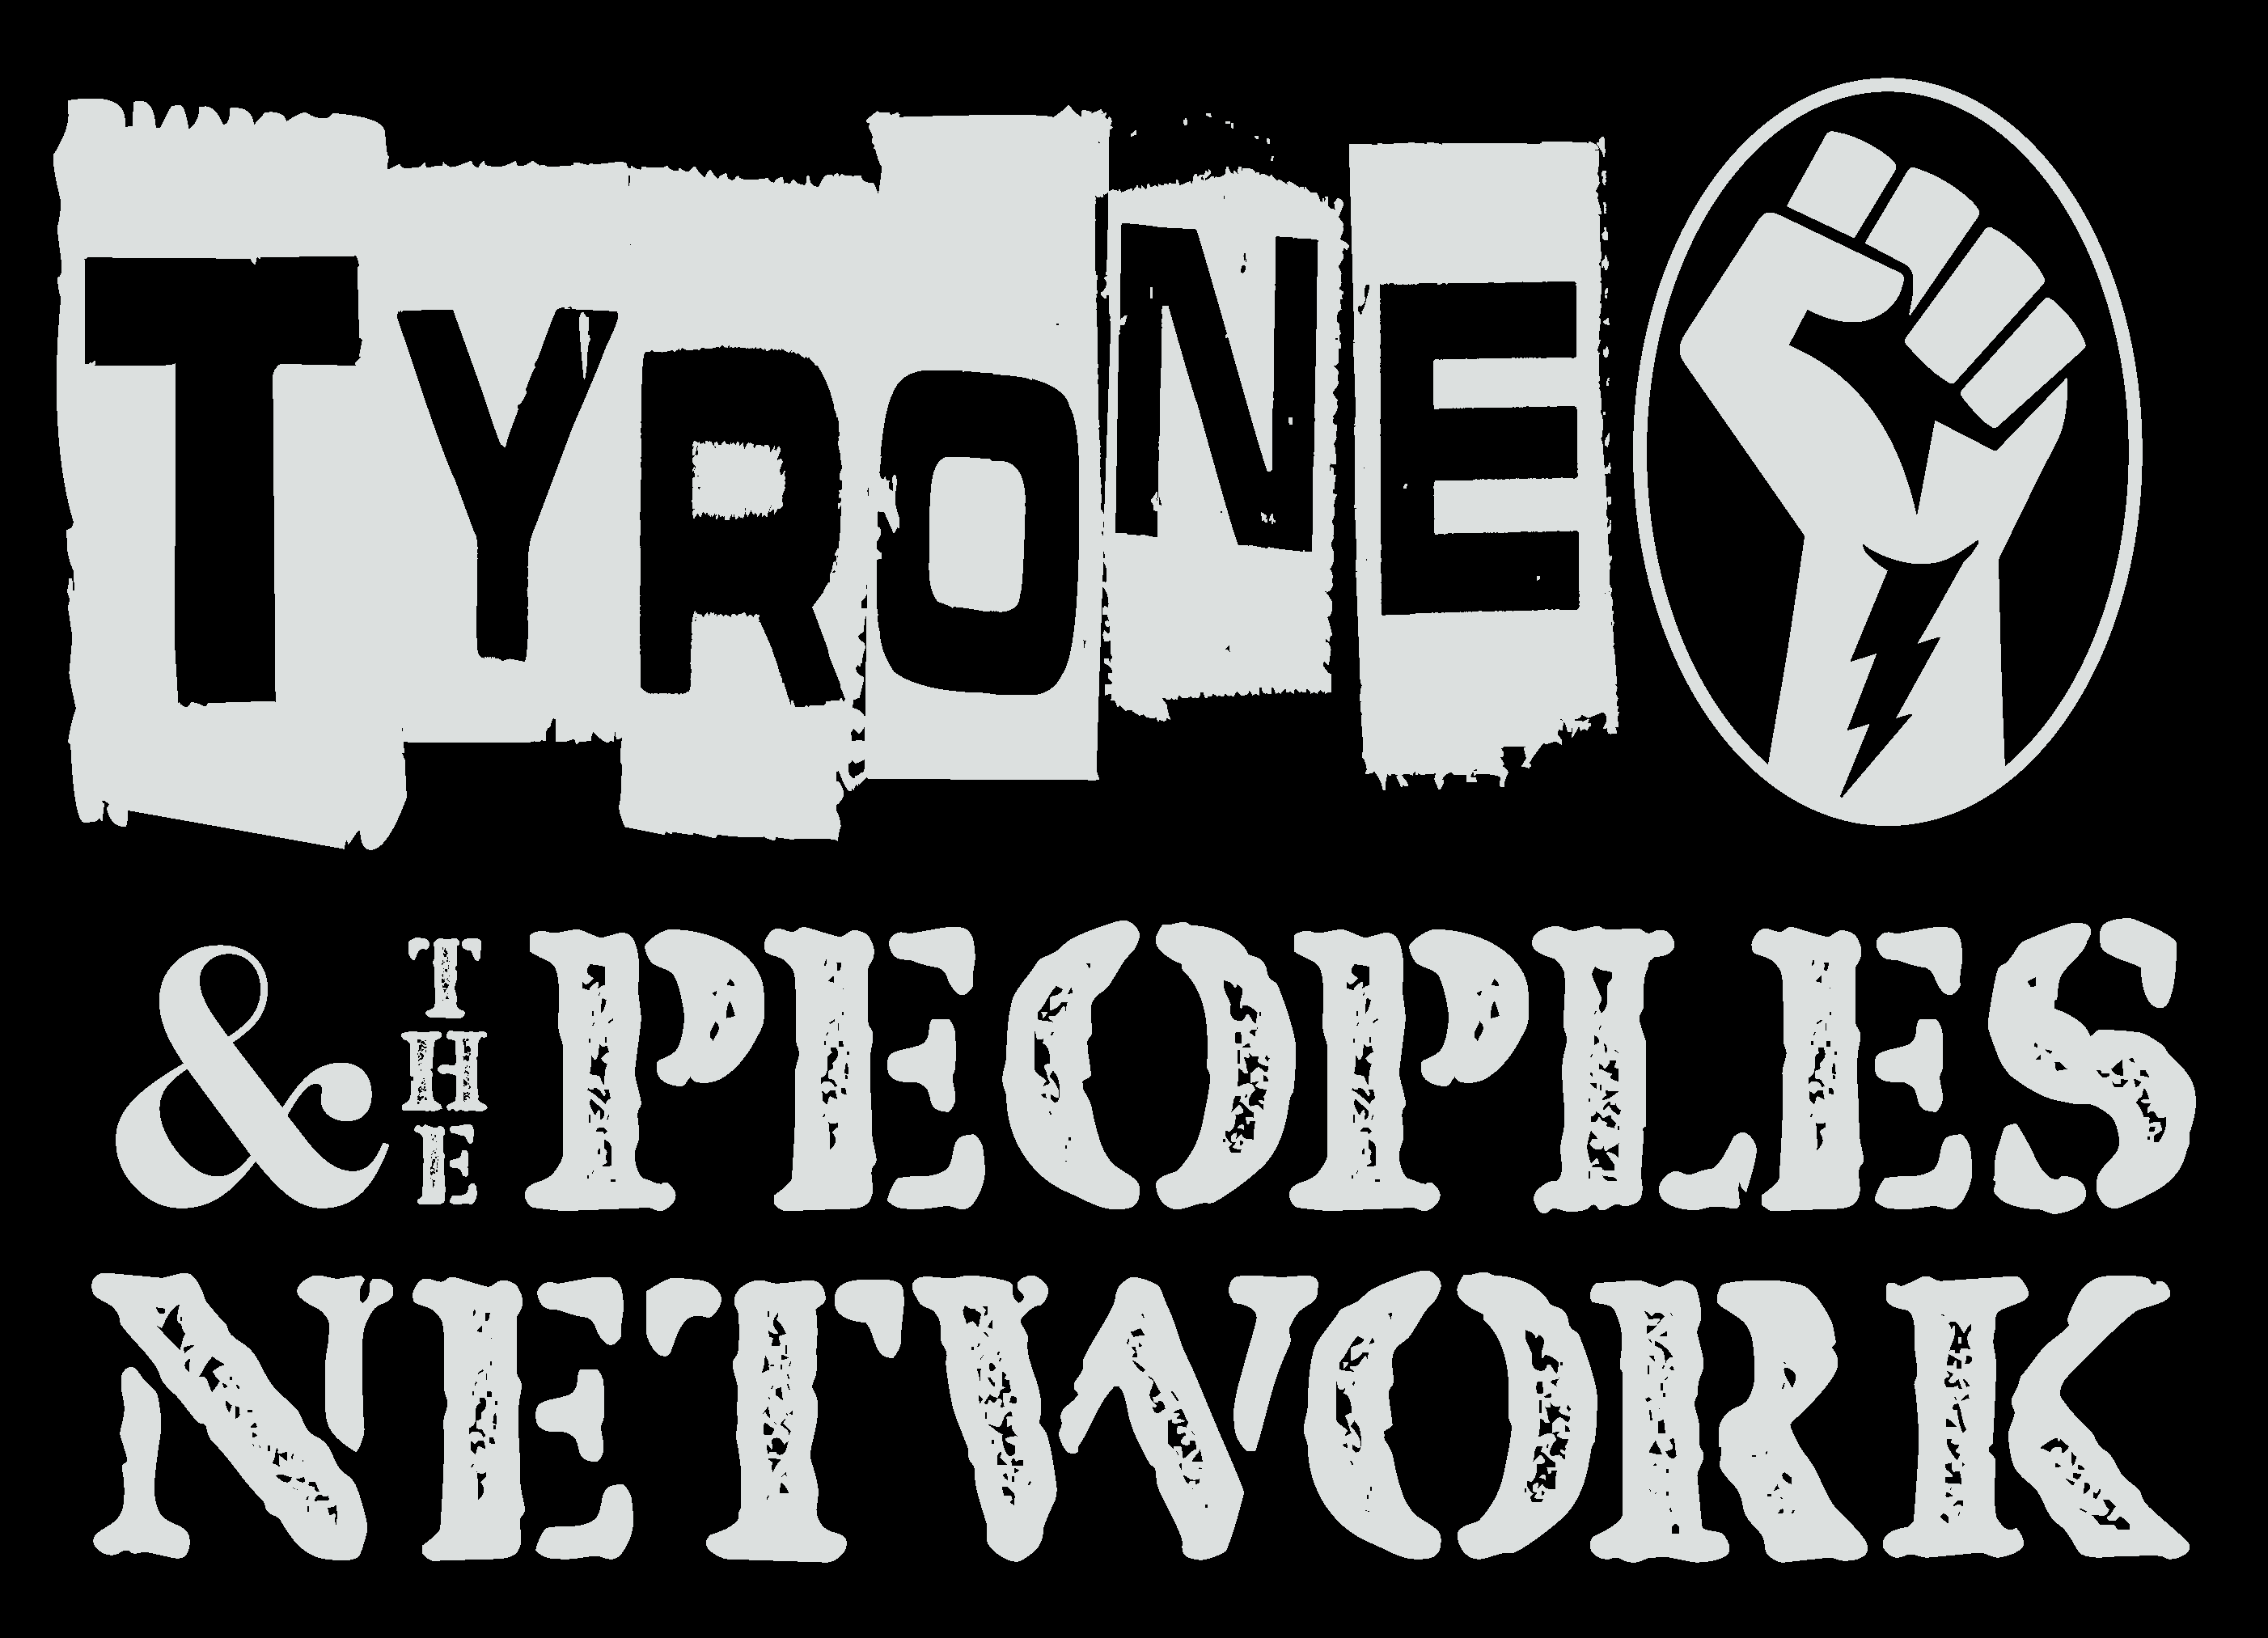 <b>Tyrone &amp; The People’s Network</b><br>